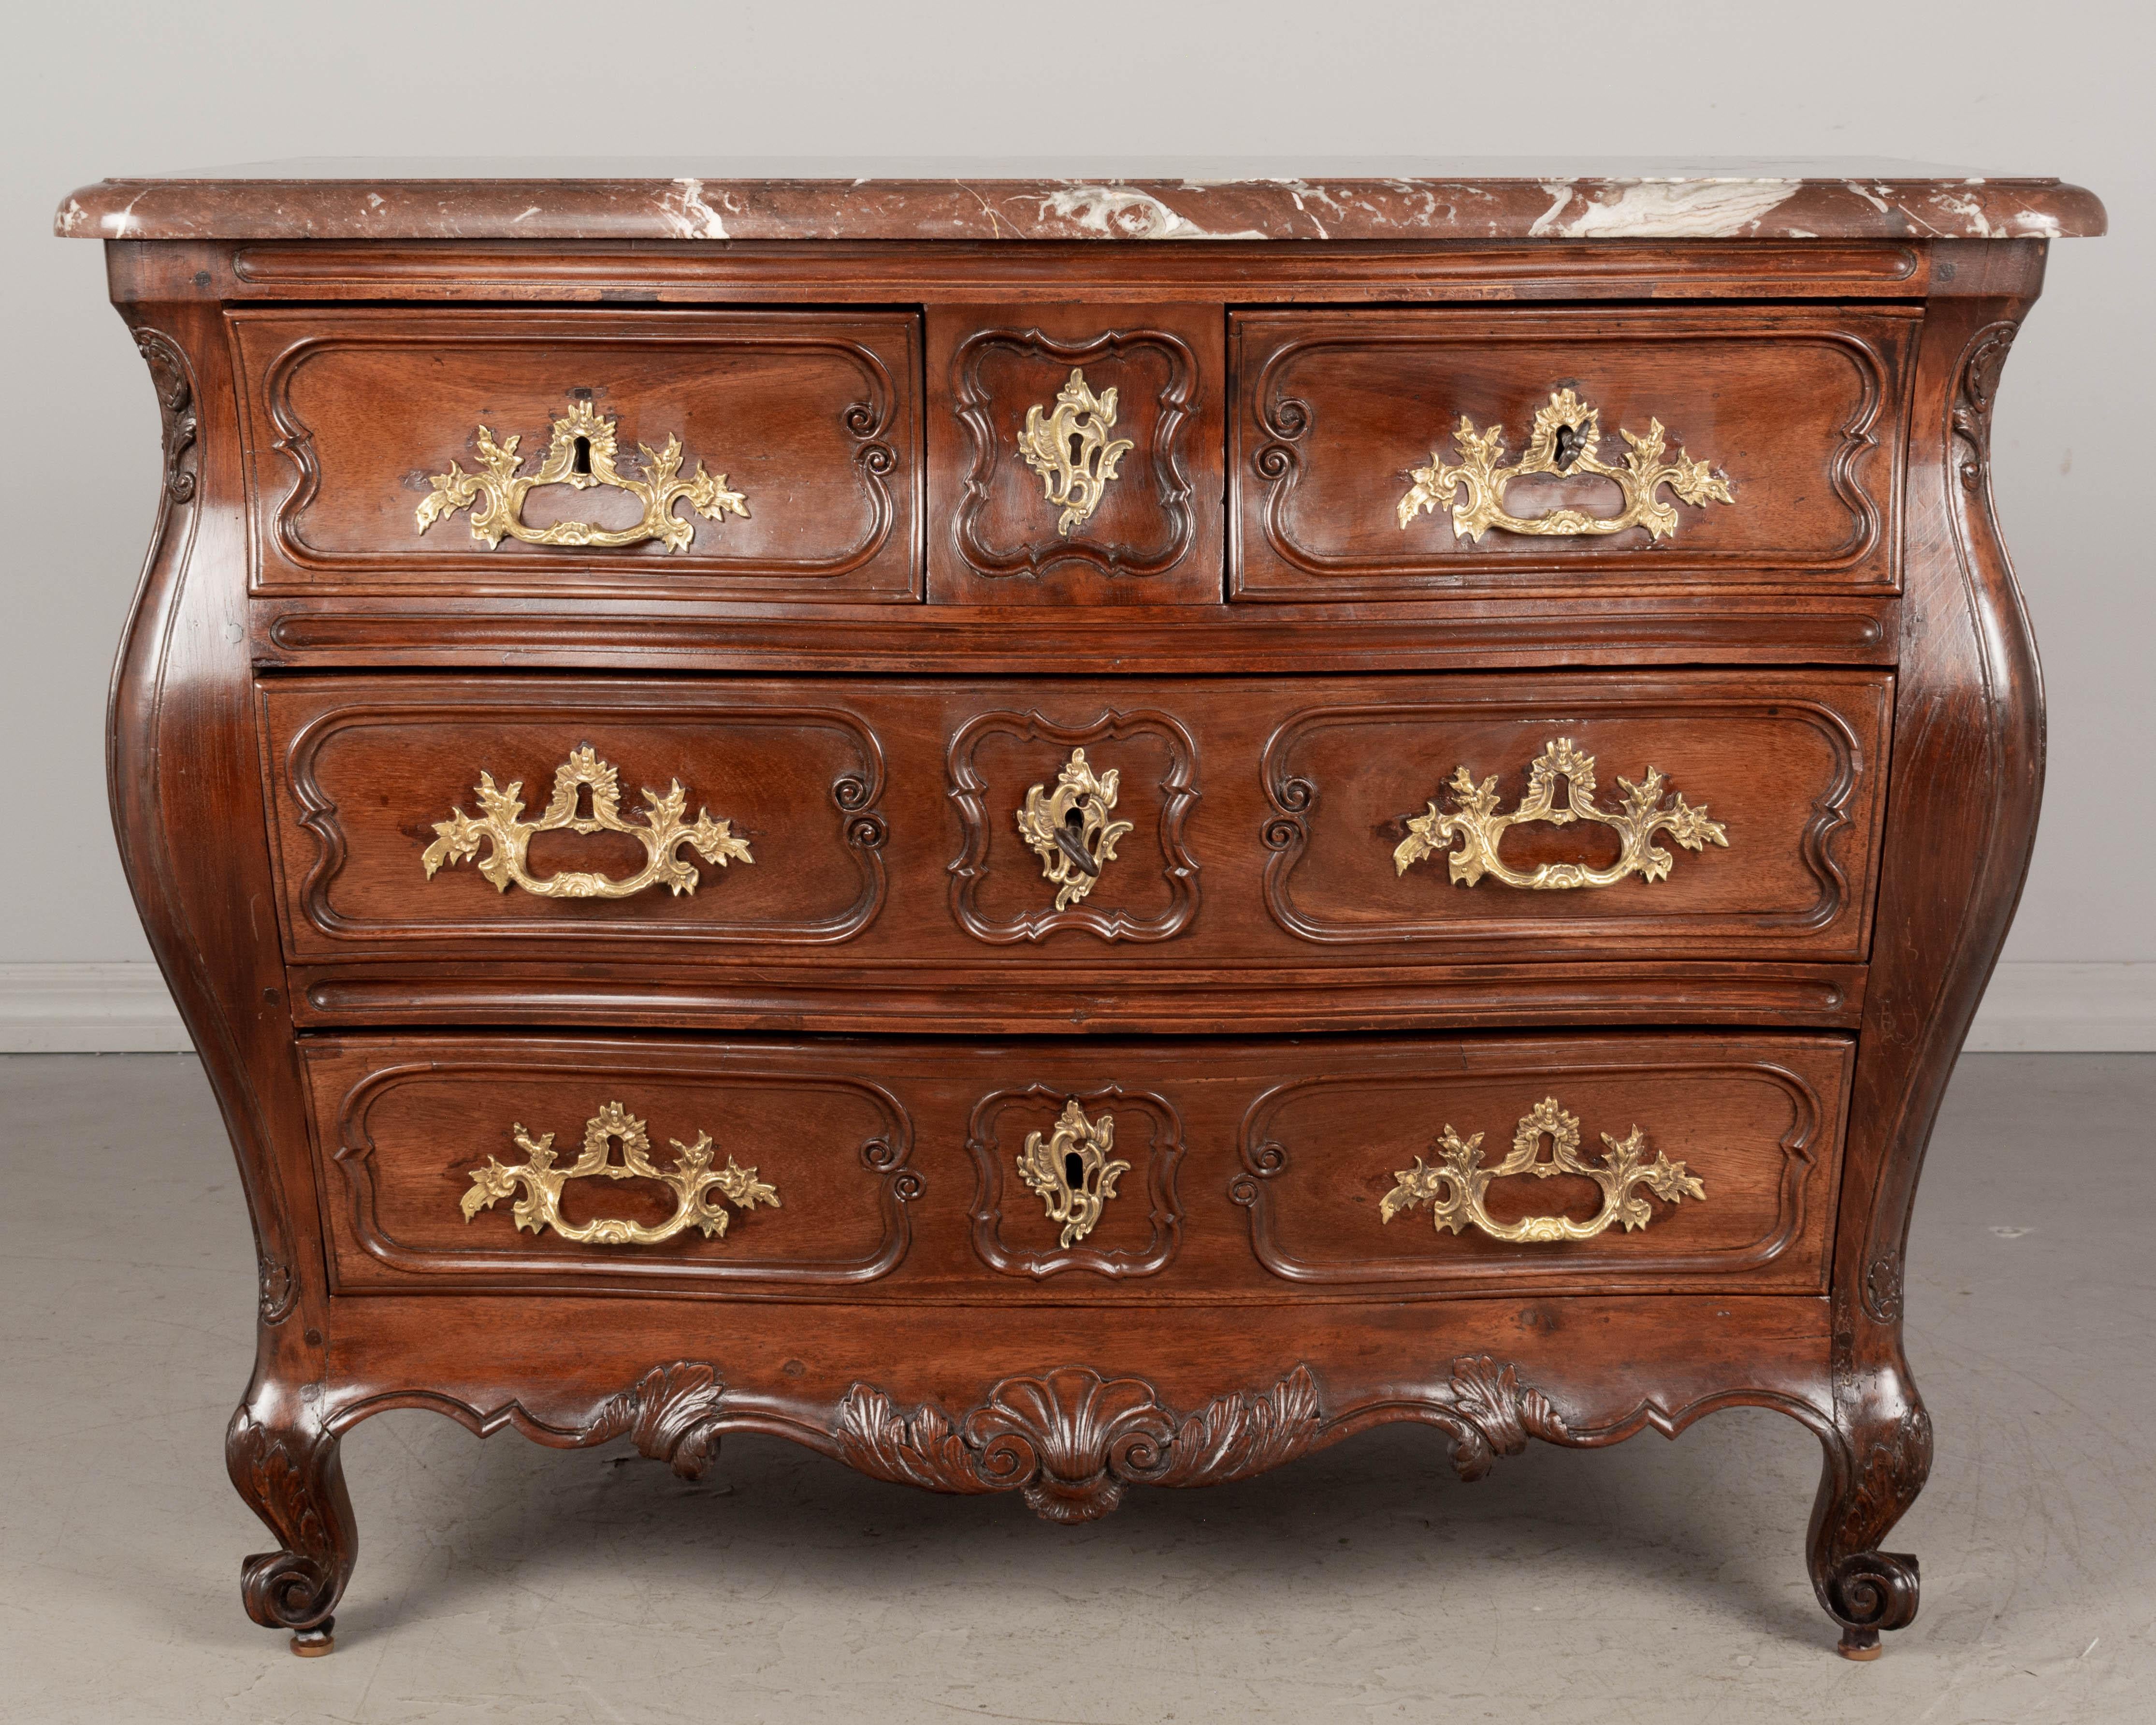 18th Century French Louis XV Bordelaise Commode In Good Condition For Sale In Winter Park, FL